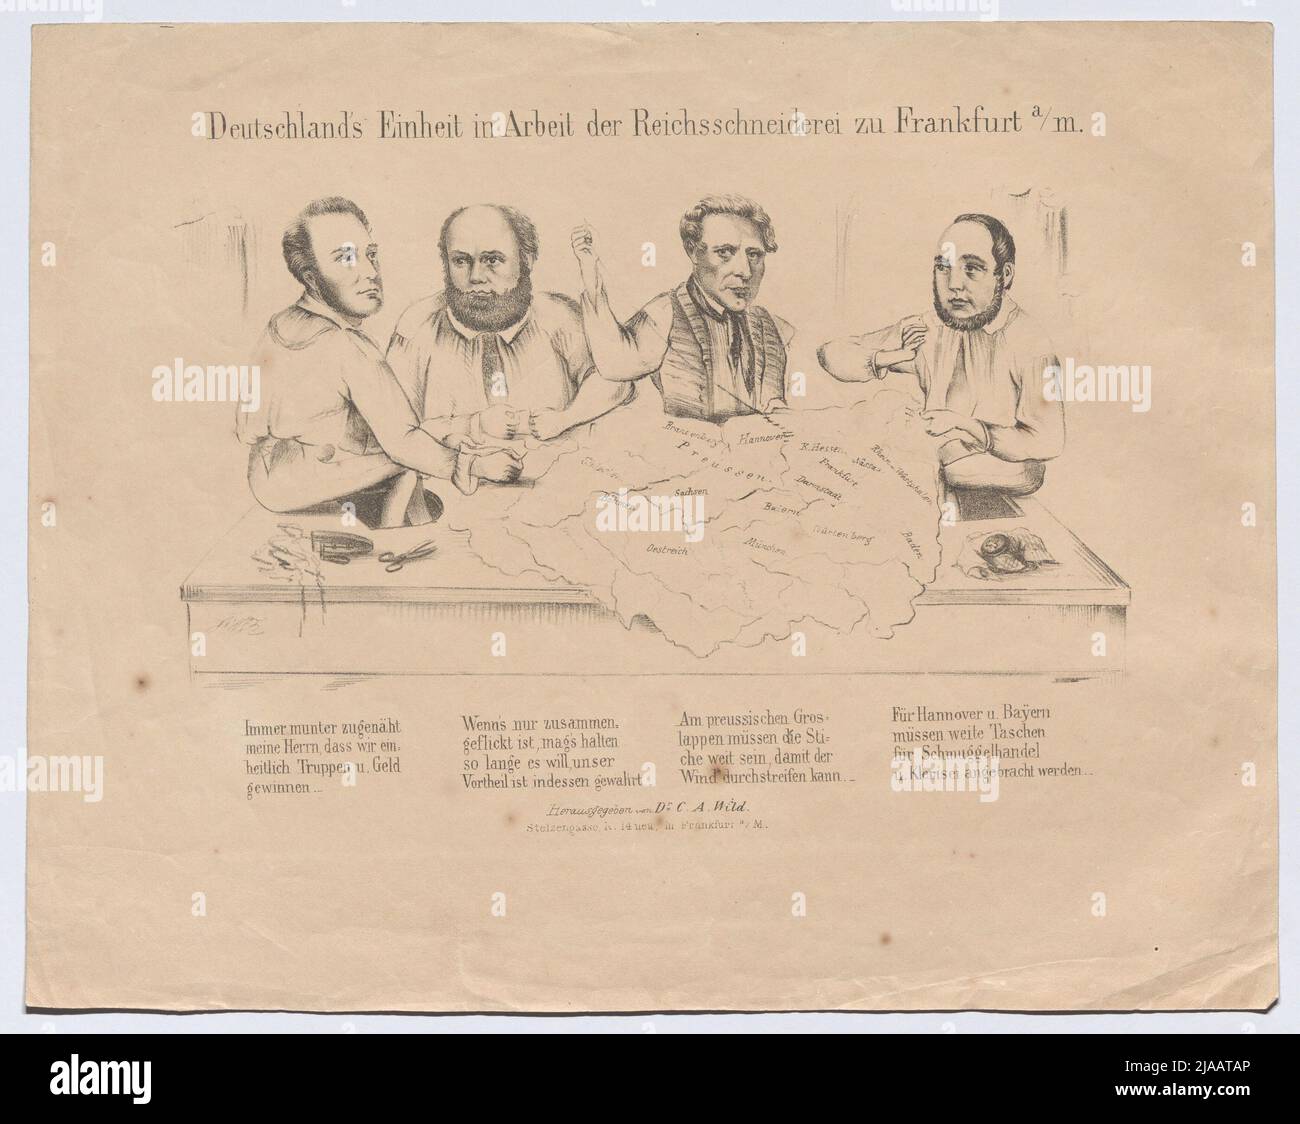 Germany's unity in the works of the Reichschneiderei zu Frankfurt a/M."  (Caricature on the National Assembly in Frankfurt 1848: (The President of  the National Assembly of Heinrich von Gagern, the Vice President,